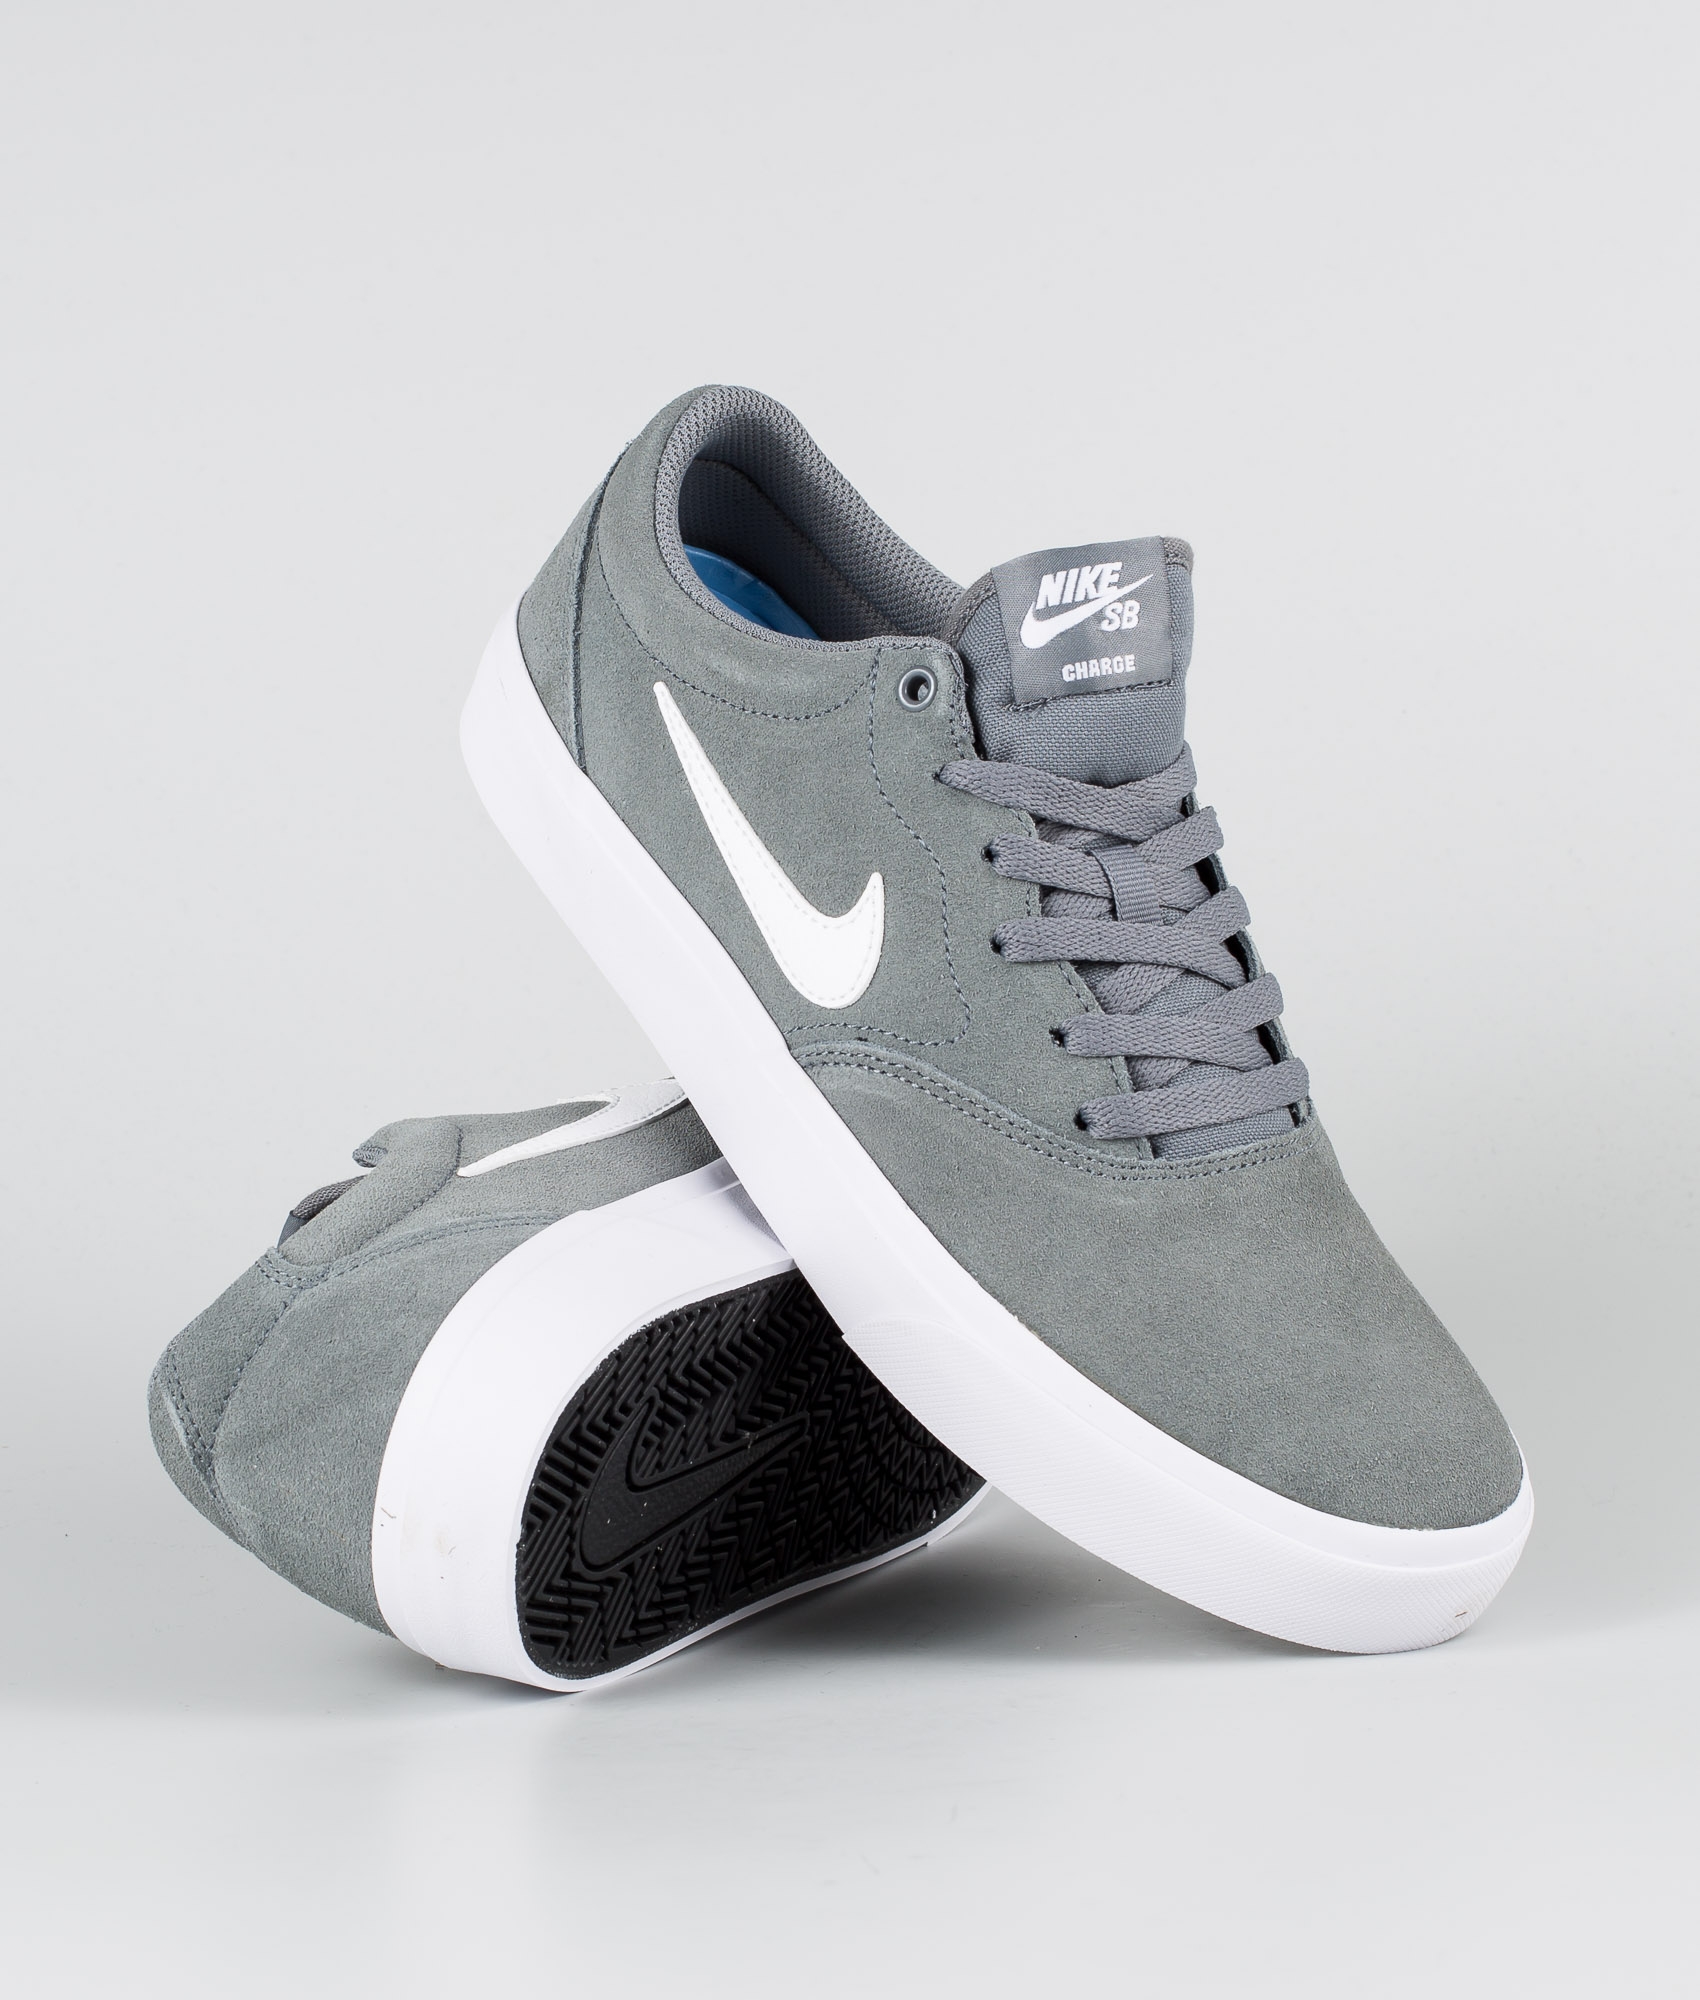 nike grey suede shoes